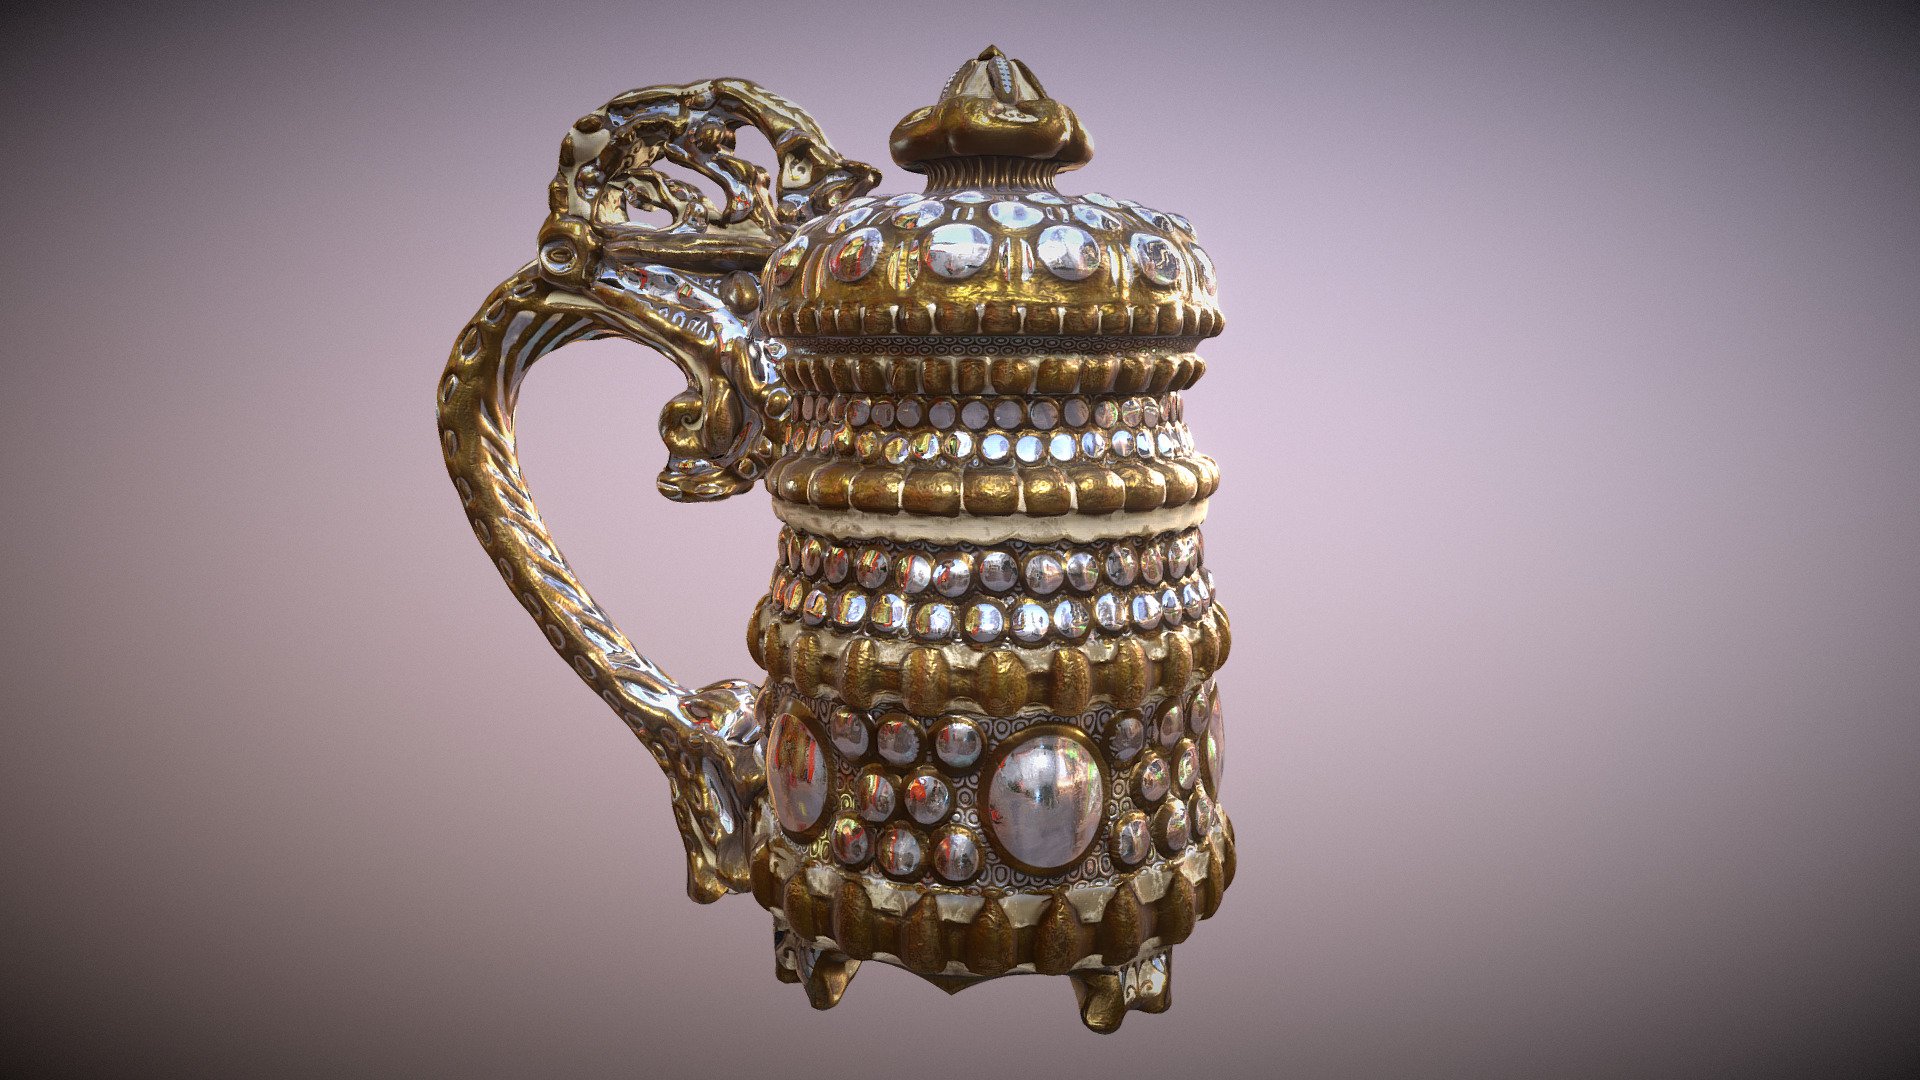 Inspired by some richly decorated beer steins. Created with Maya, Mudbox and Substance Painter 3d model